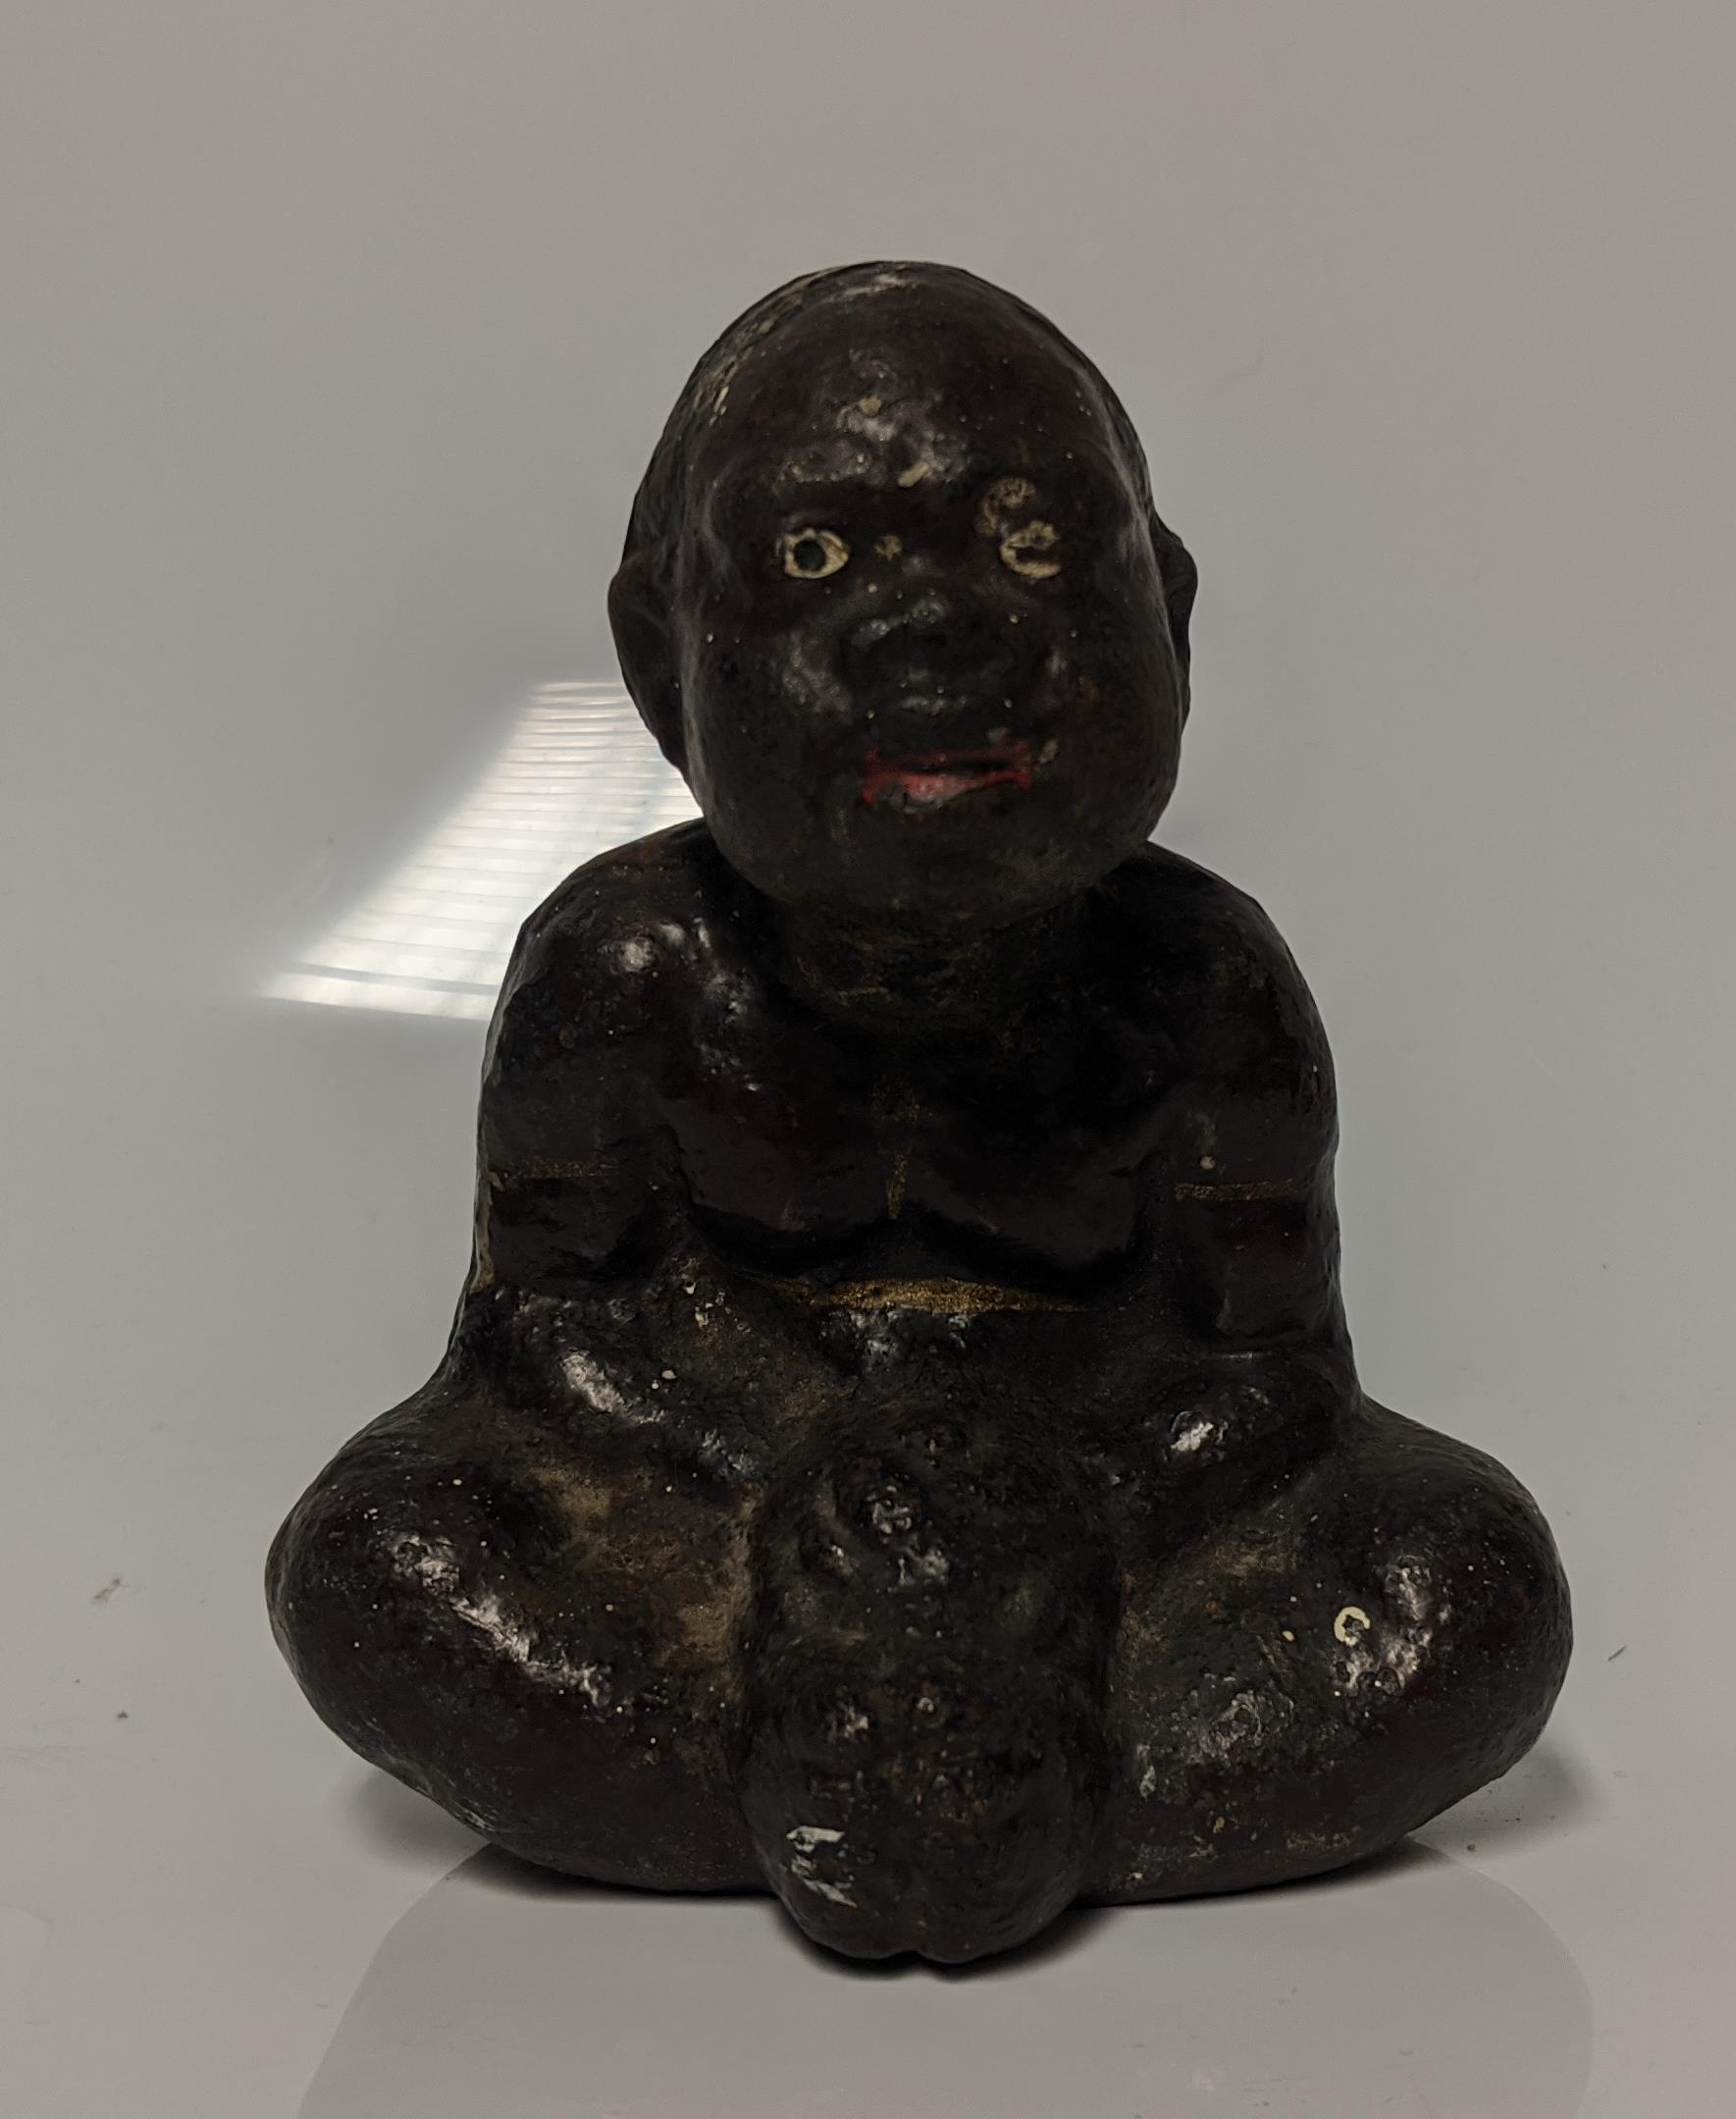 An early 20th century cast iron Black Americana paperweight / figurine of a seated male figure being